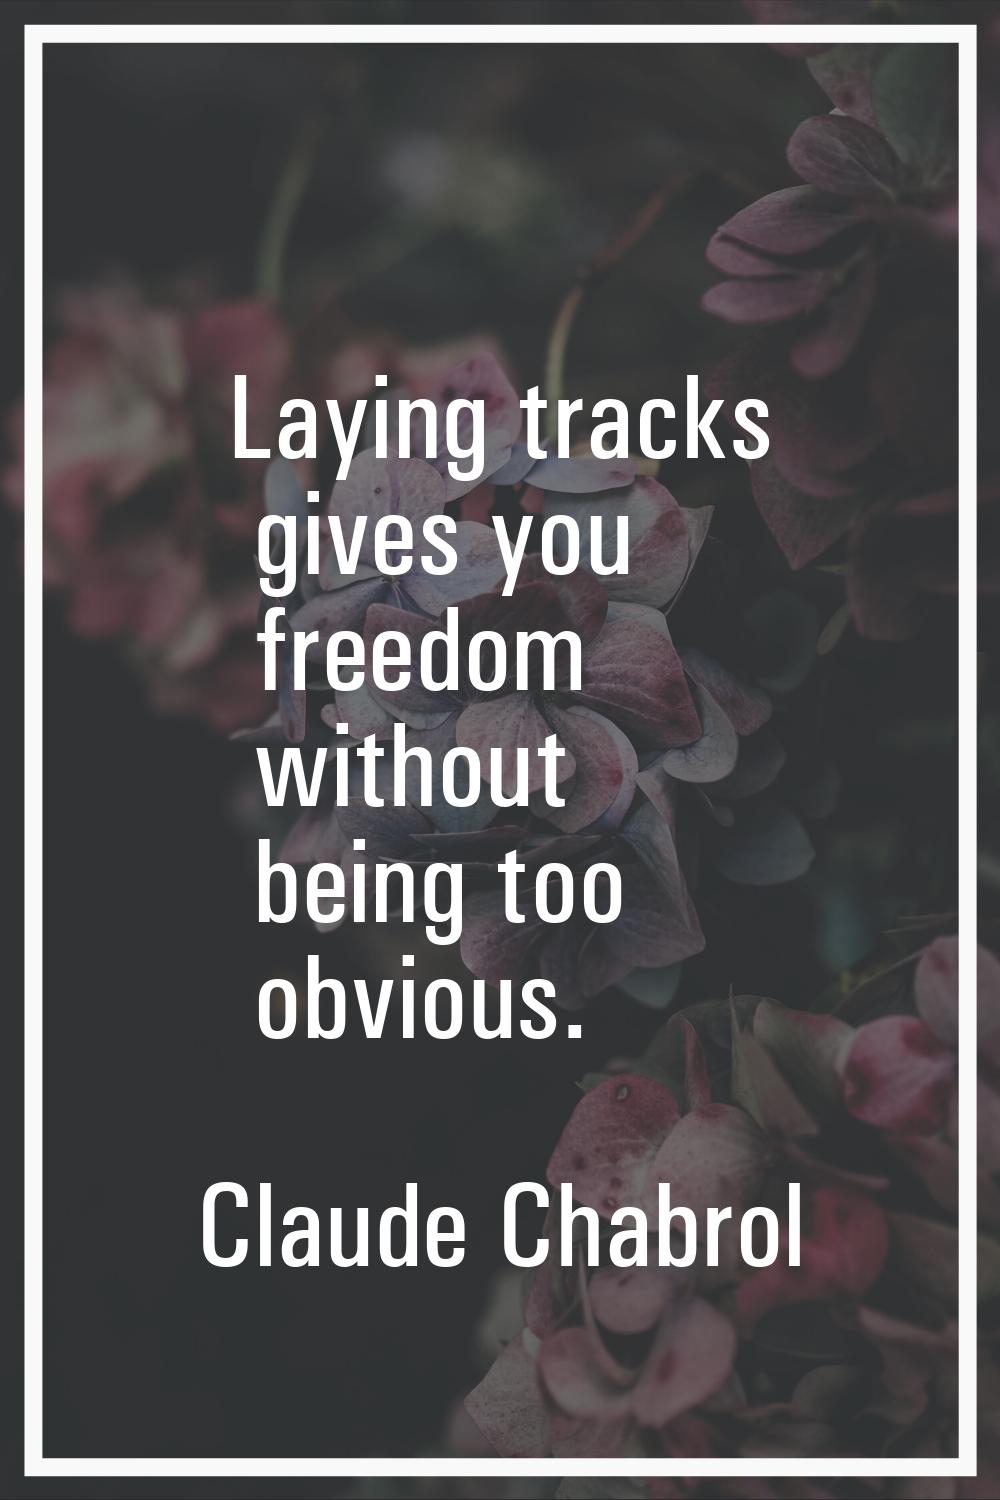 Laying tracks gives you freedom without being too obvious.